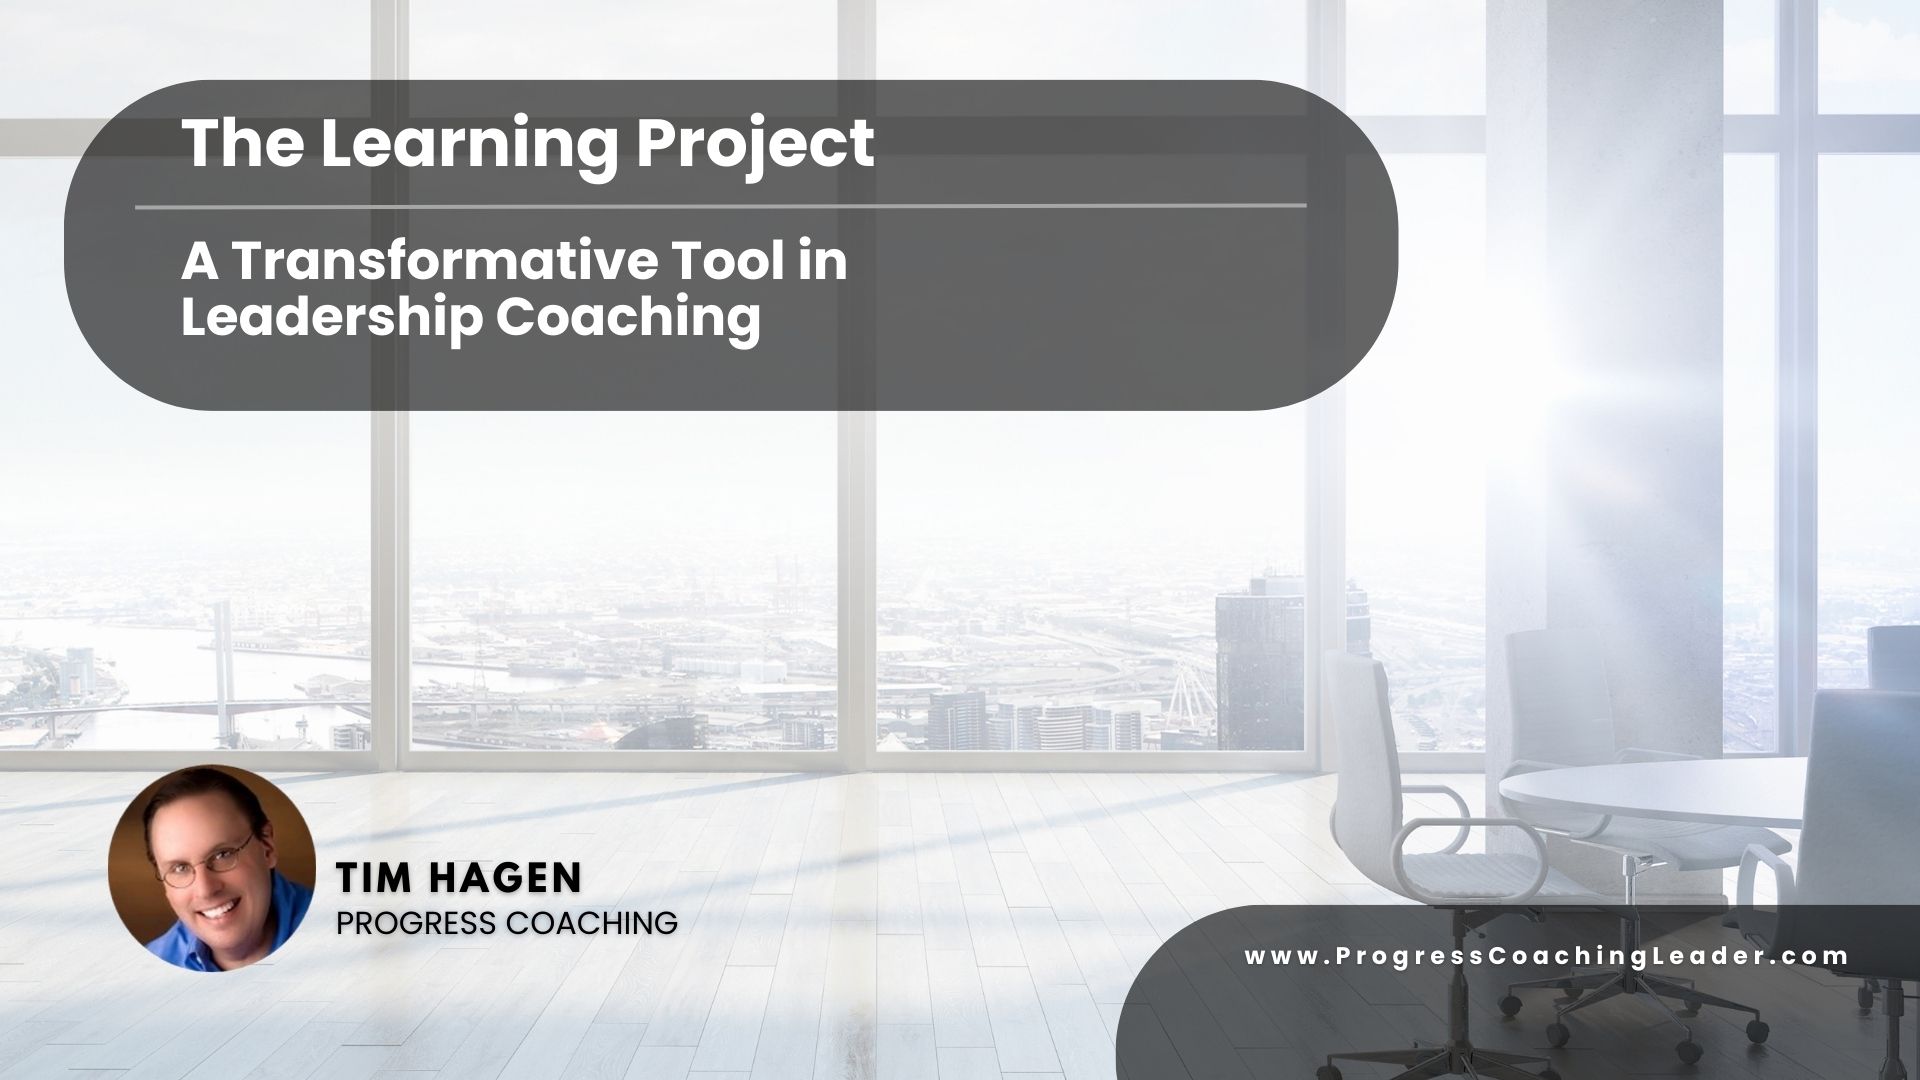 The Learning Project: A Transformative Tool in Leadership Coaching